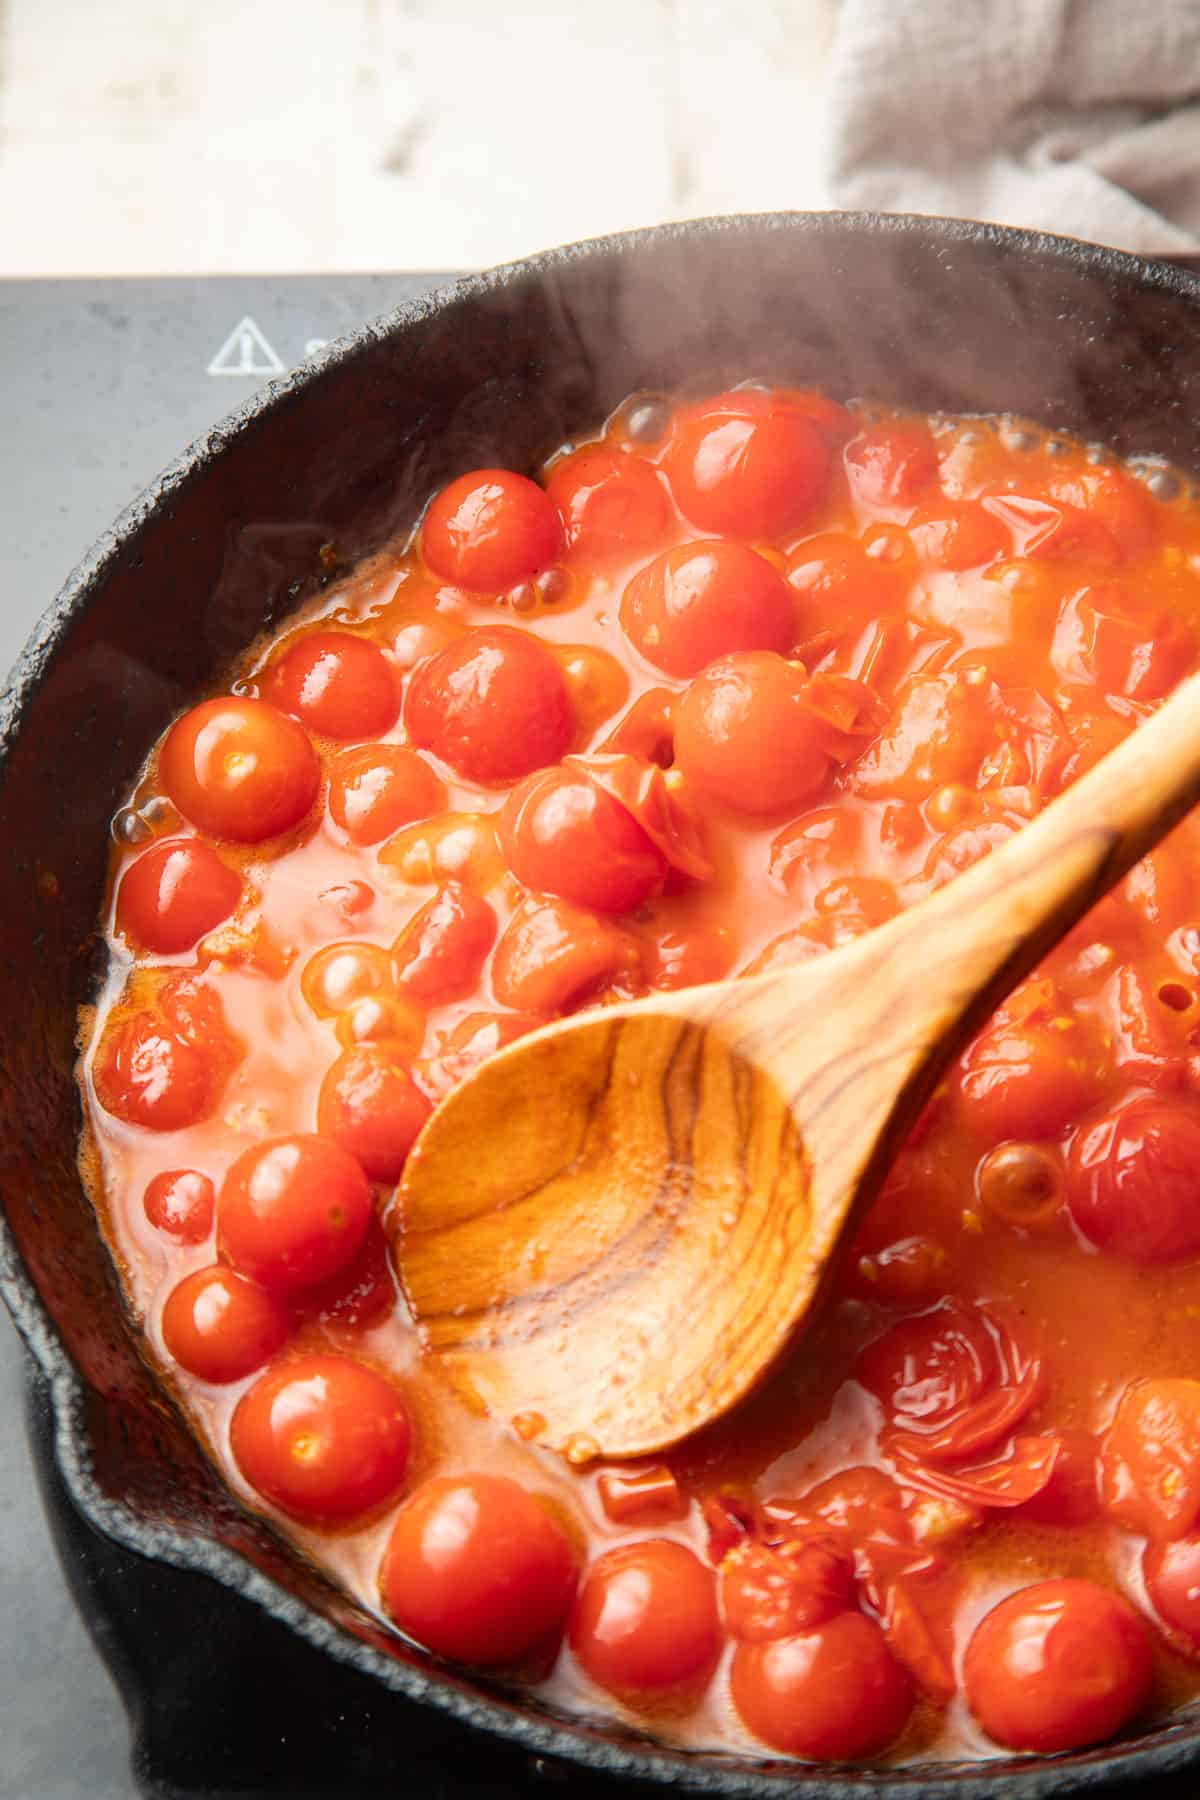 Cherry tomatoes cooking in a skillet with a wooden spoon.